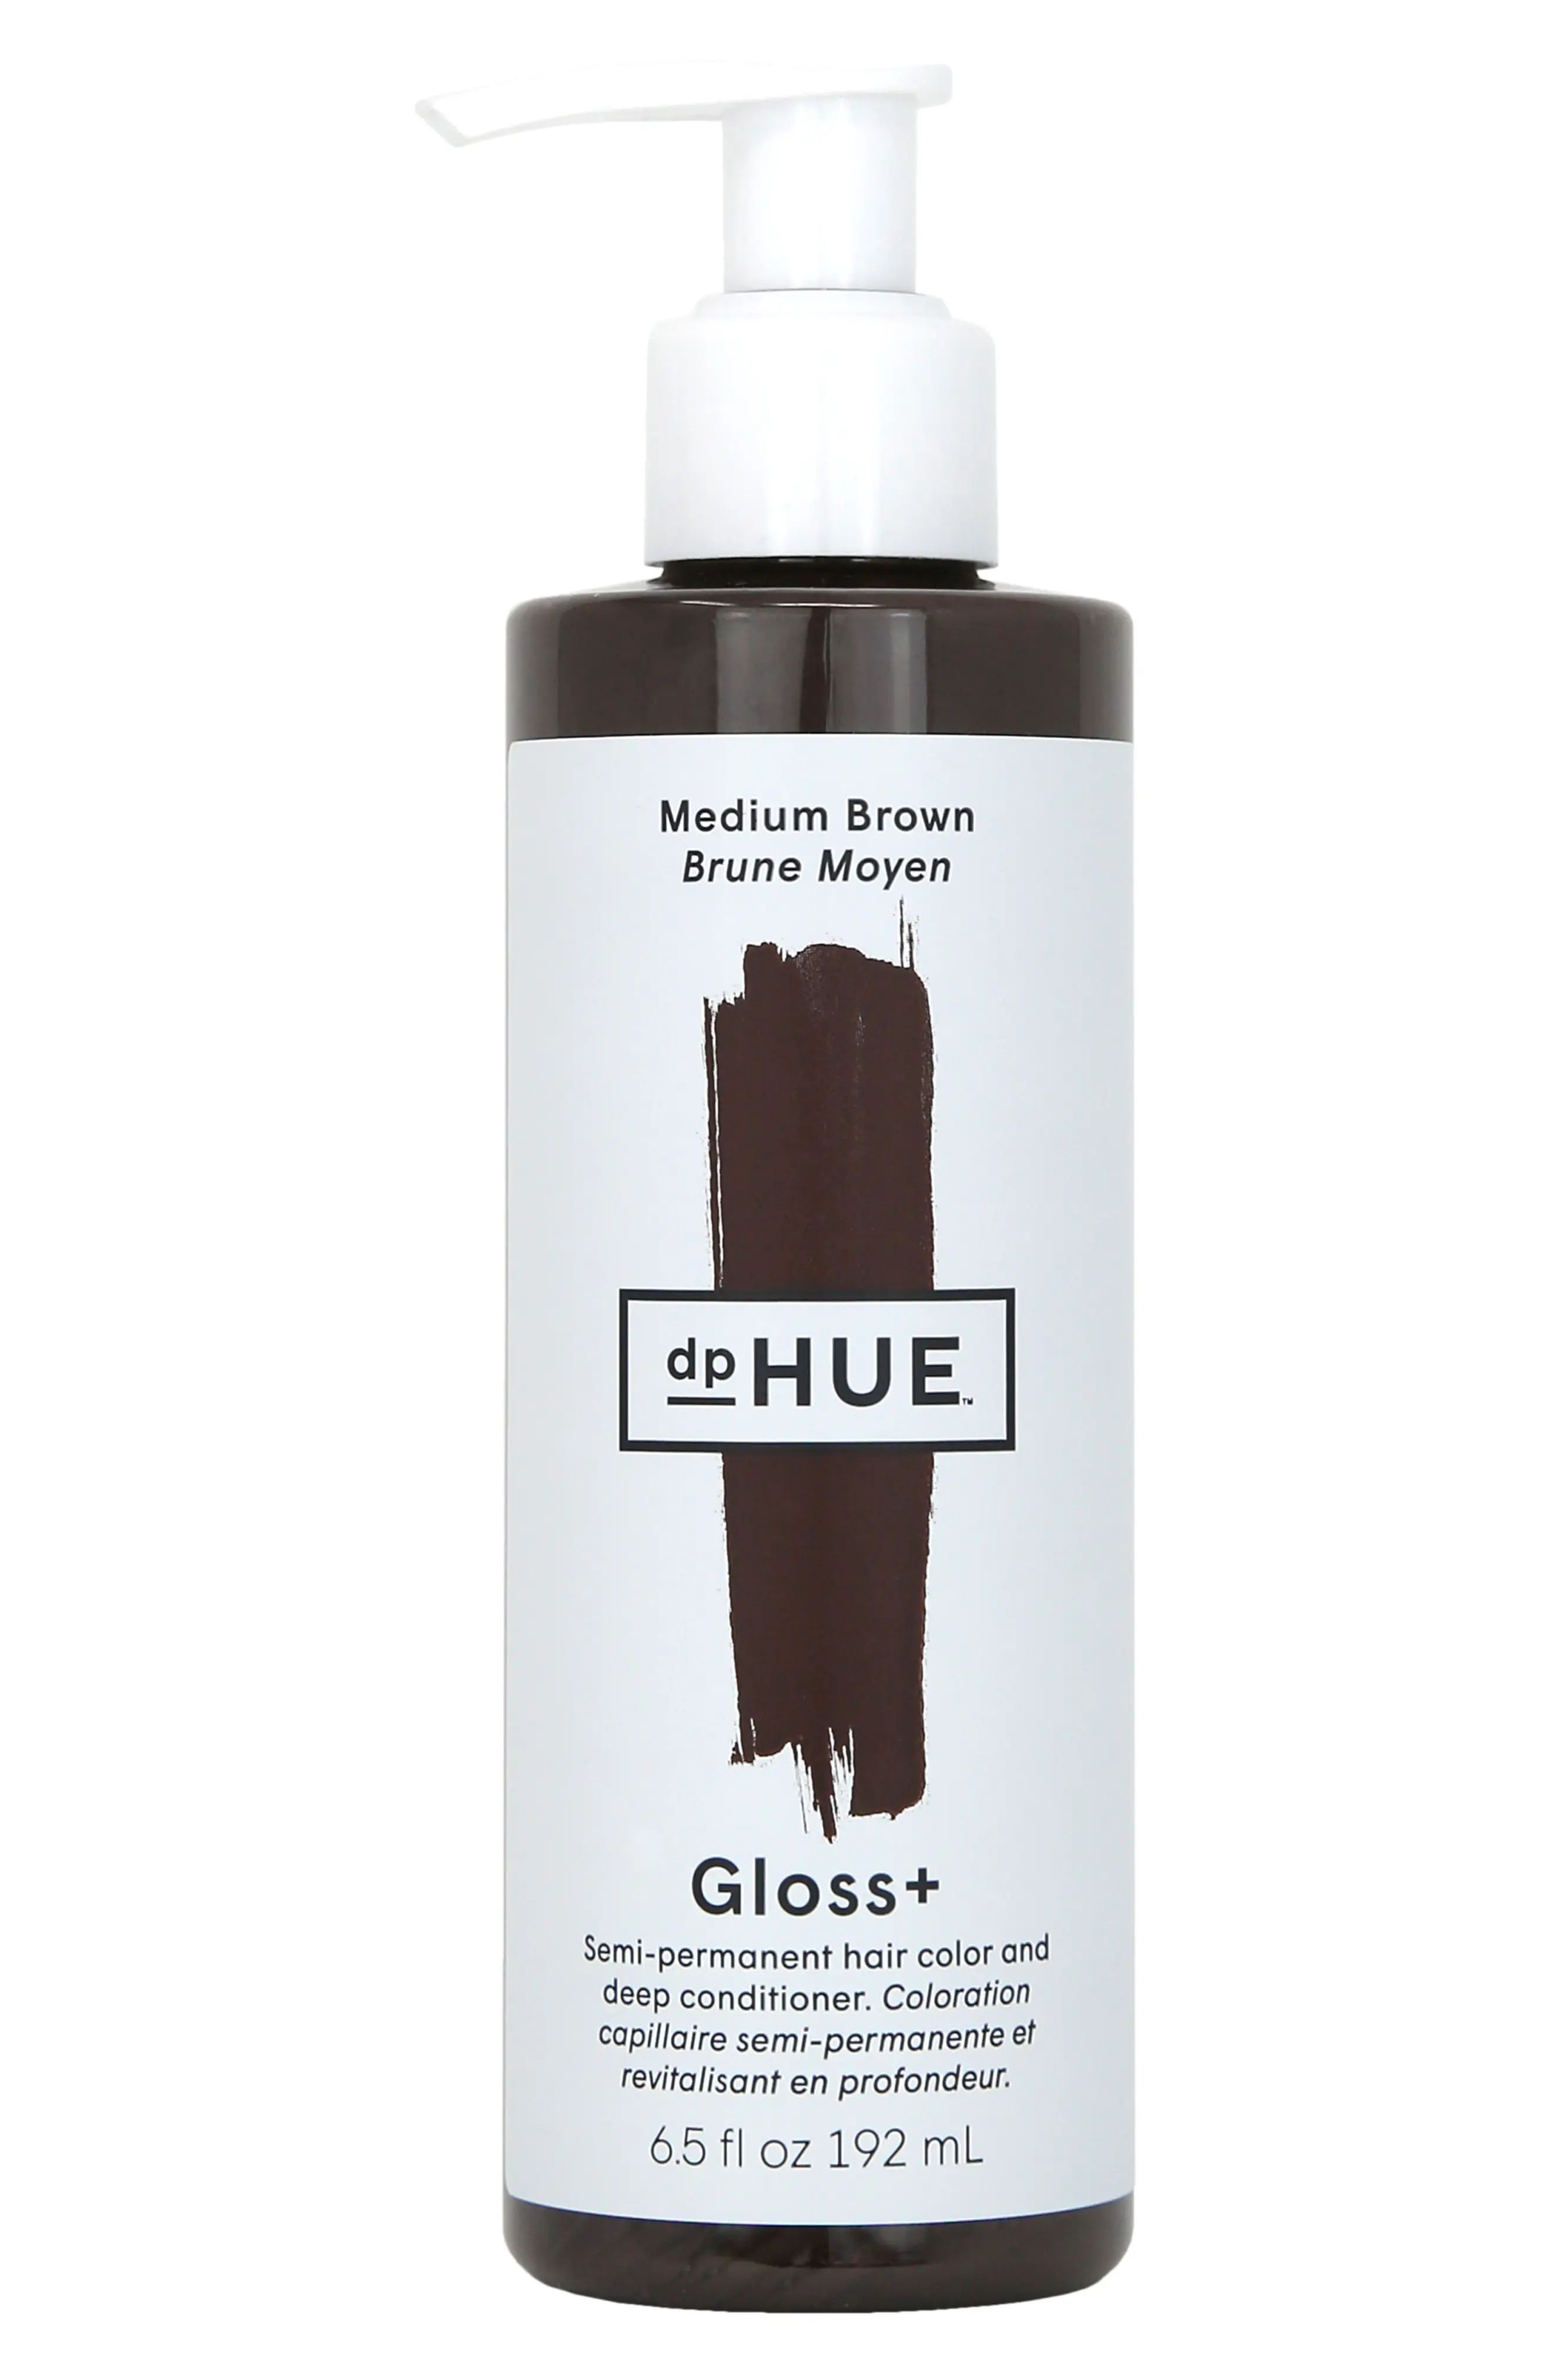 dpHUE Gloss+ Semi-Permanent Hair Color & Deep Conditioner in Medium Brown at Nordstrom | Nordstrom